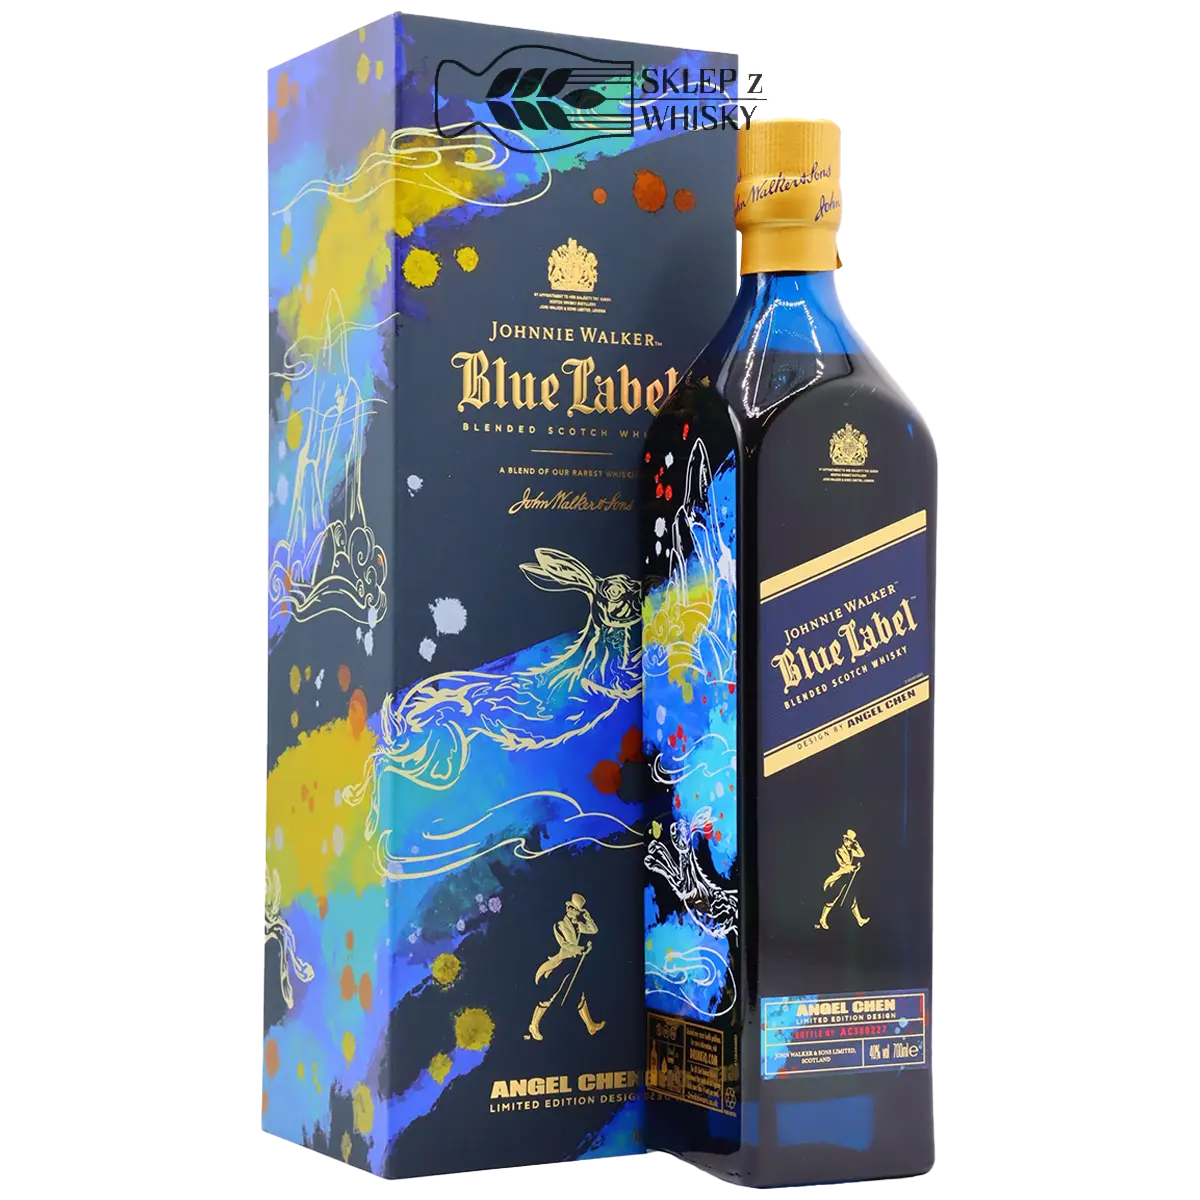 Johnnie Walker Blue Label Year Of The Rabbit - szkocka whisky blended, 700 ml, w pudełku